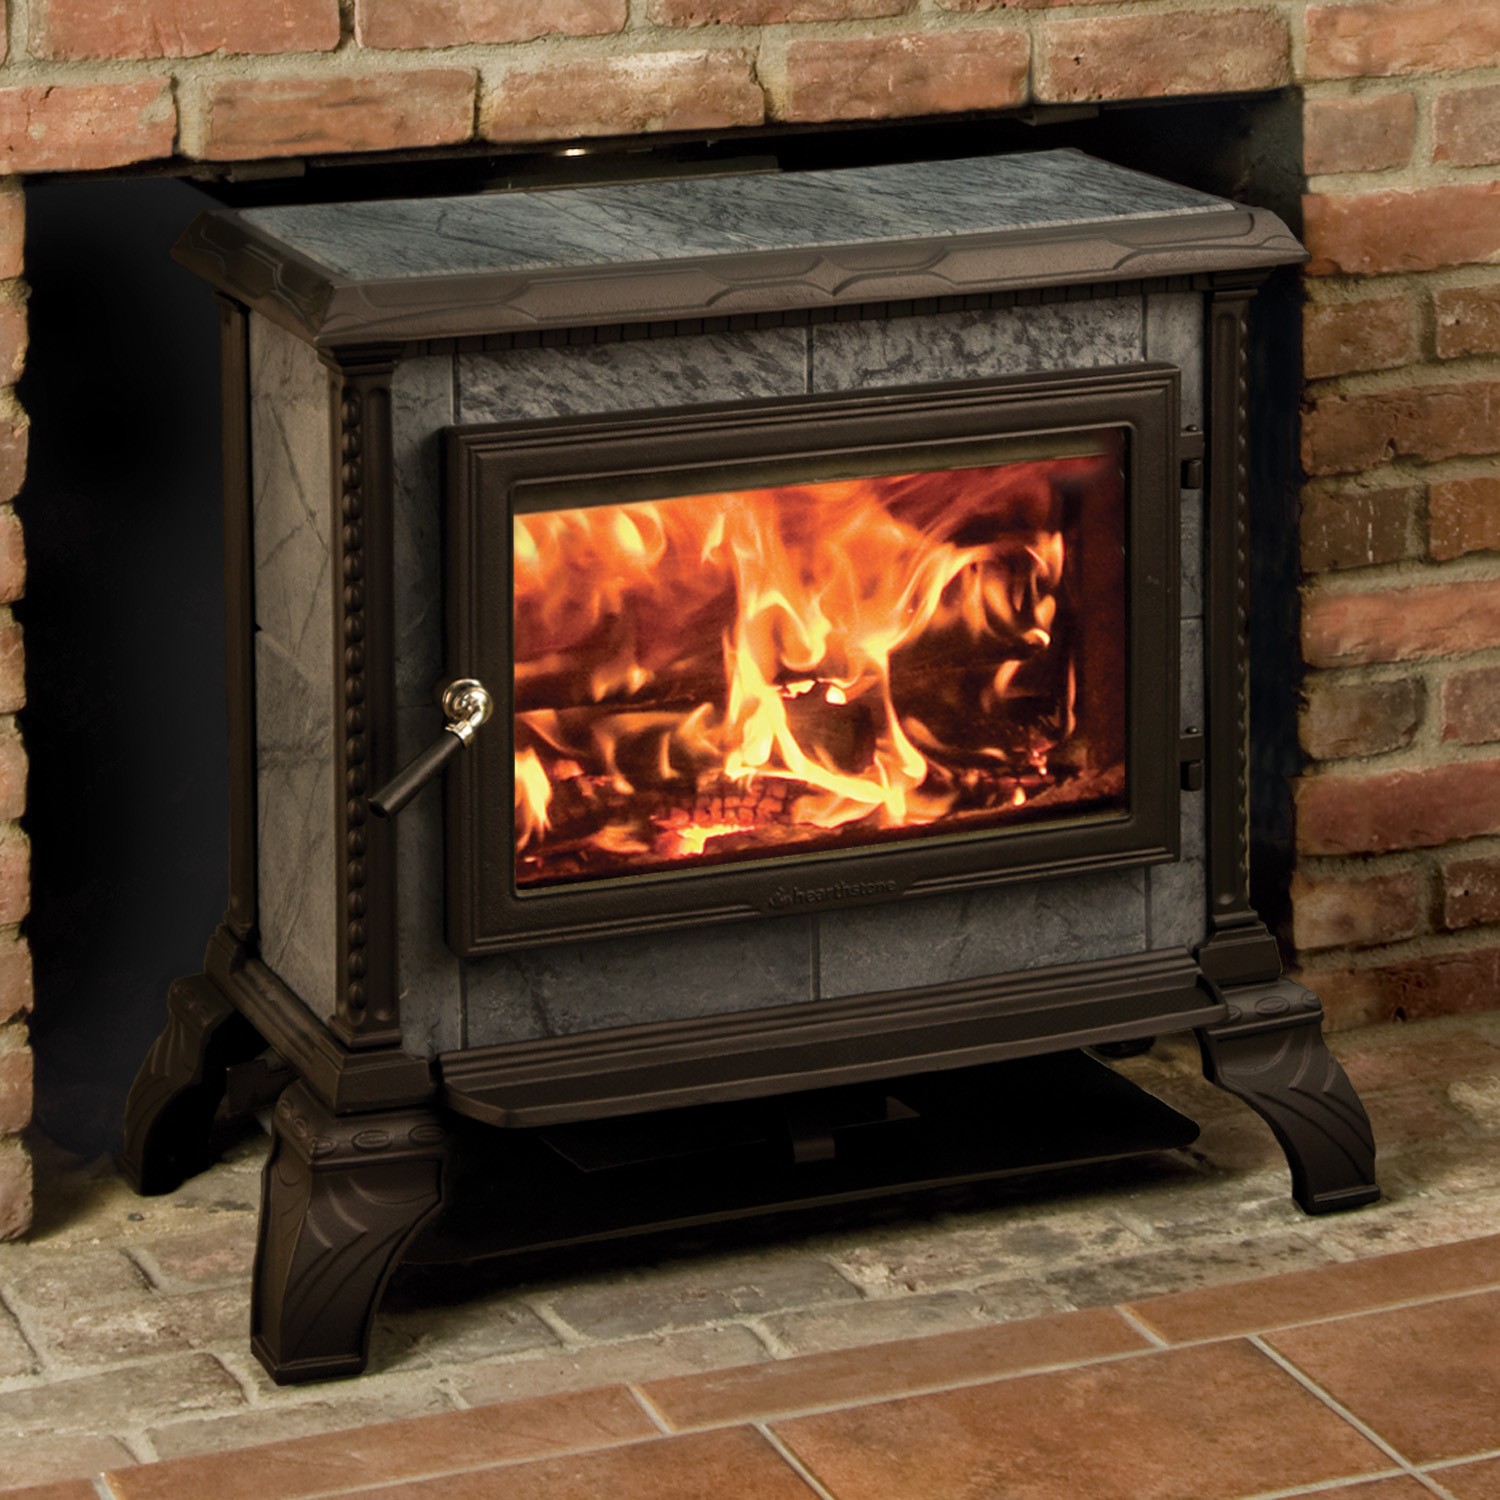 Homestead Freestanding 8570F Wood Stove made of black iron and granite with brick background and hearth.